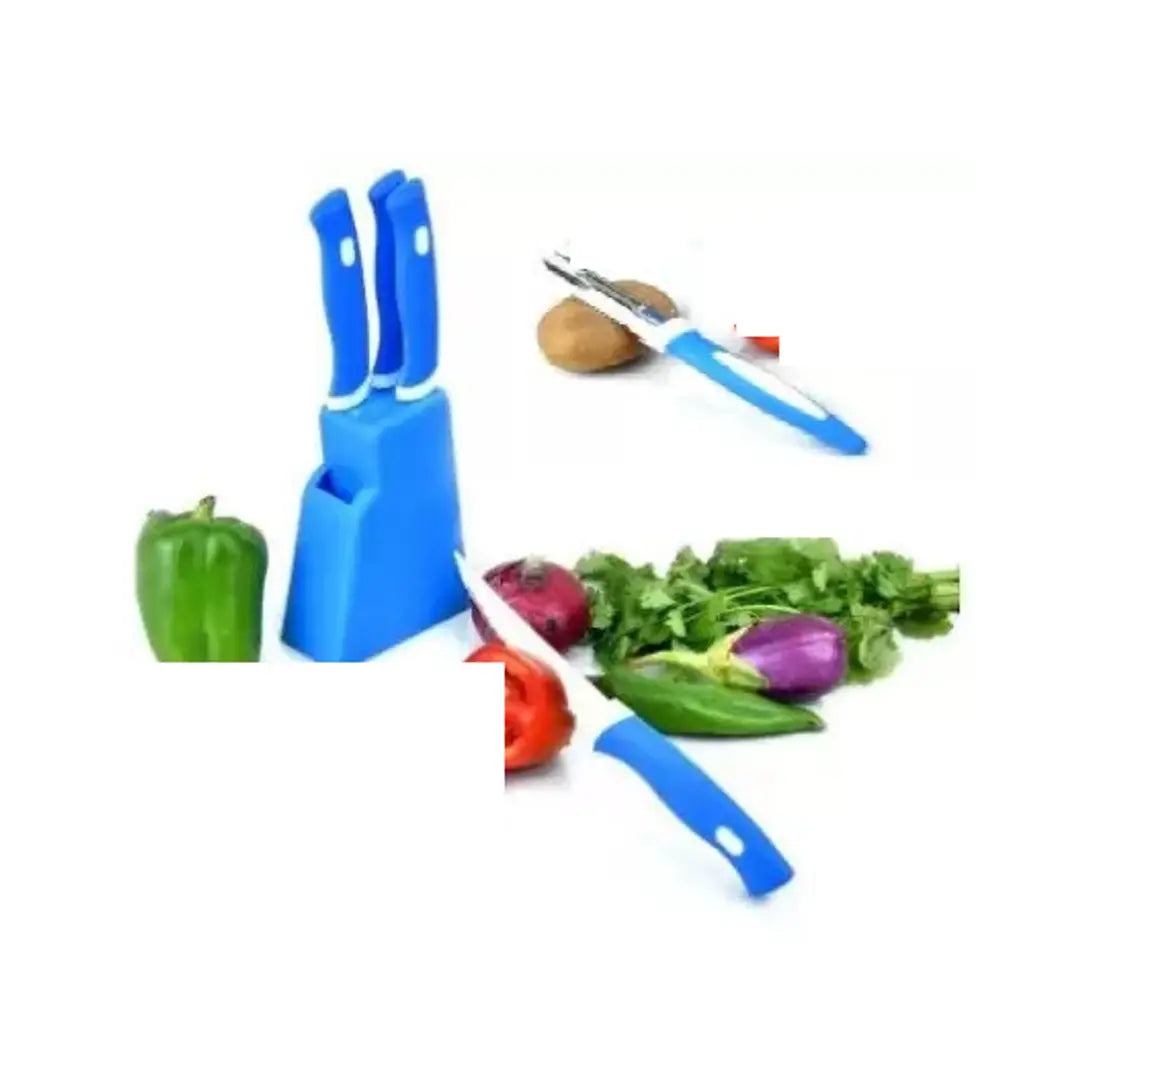 Knife Set for Kitchen with Stand, Knife Set for Kitchen use,5 Pieces Kitchen Knife Set with Holder Stand 4 Knife + 1 Peeler + 1 Stand (BLUE)